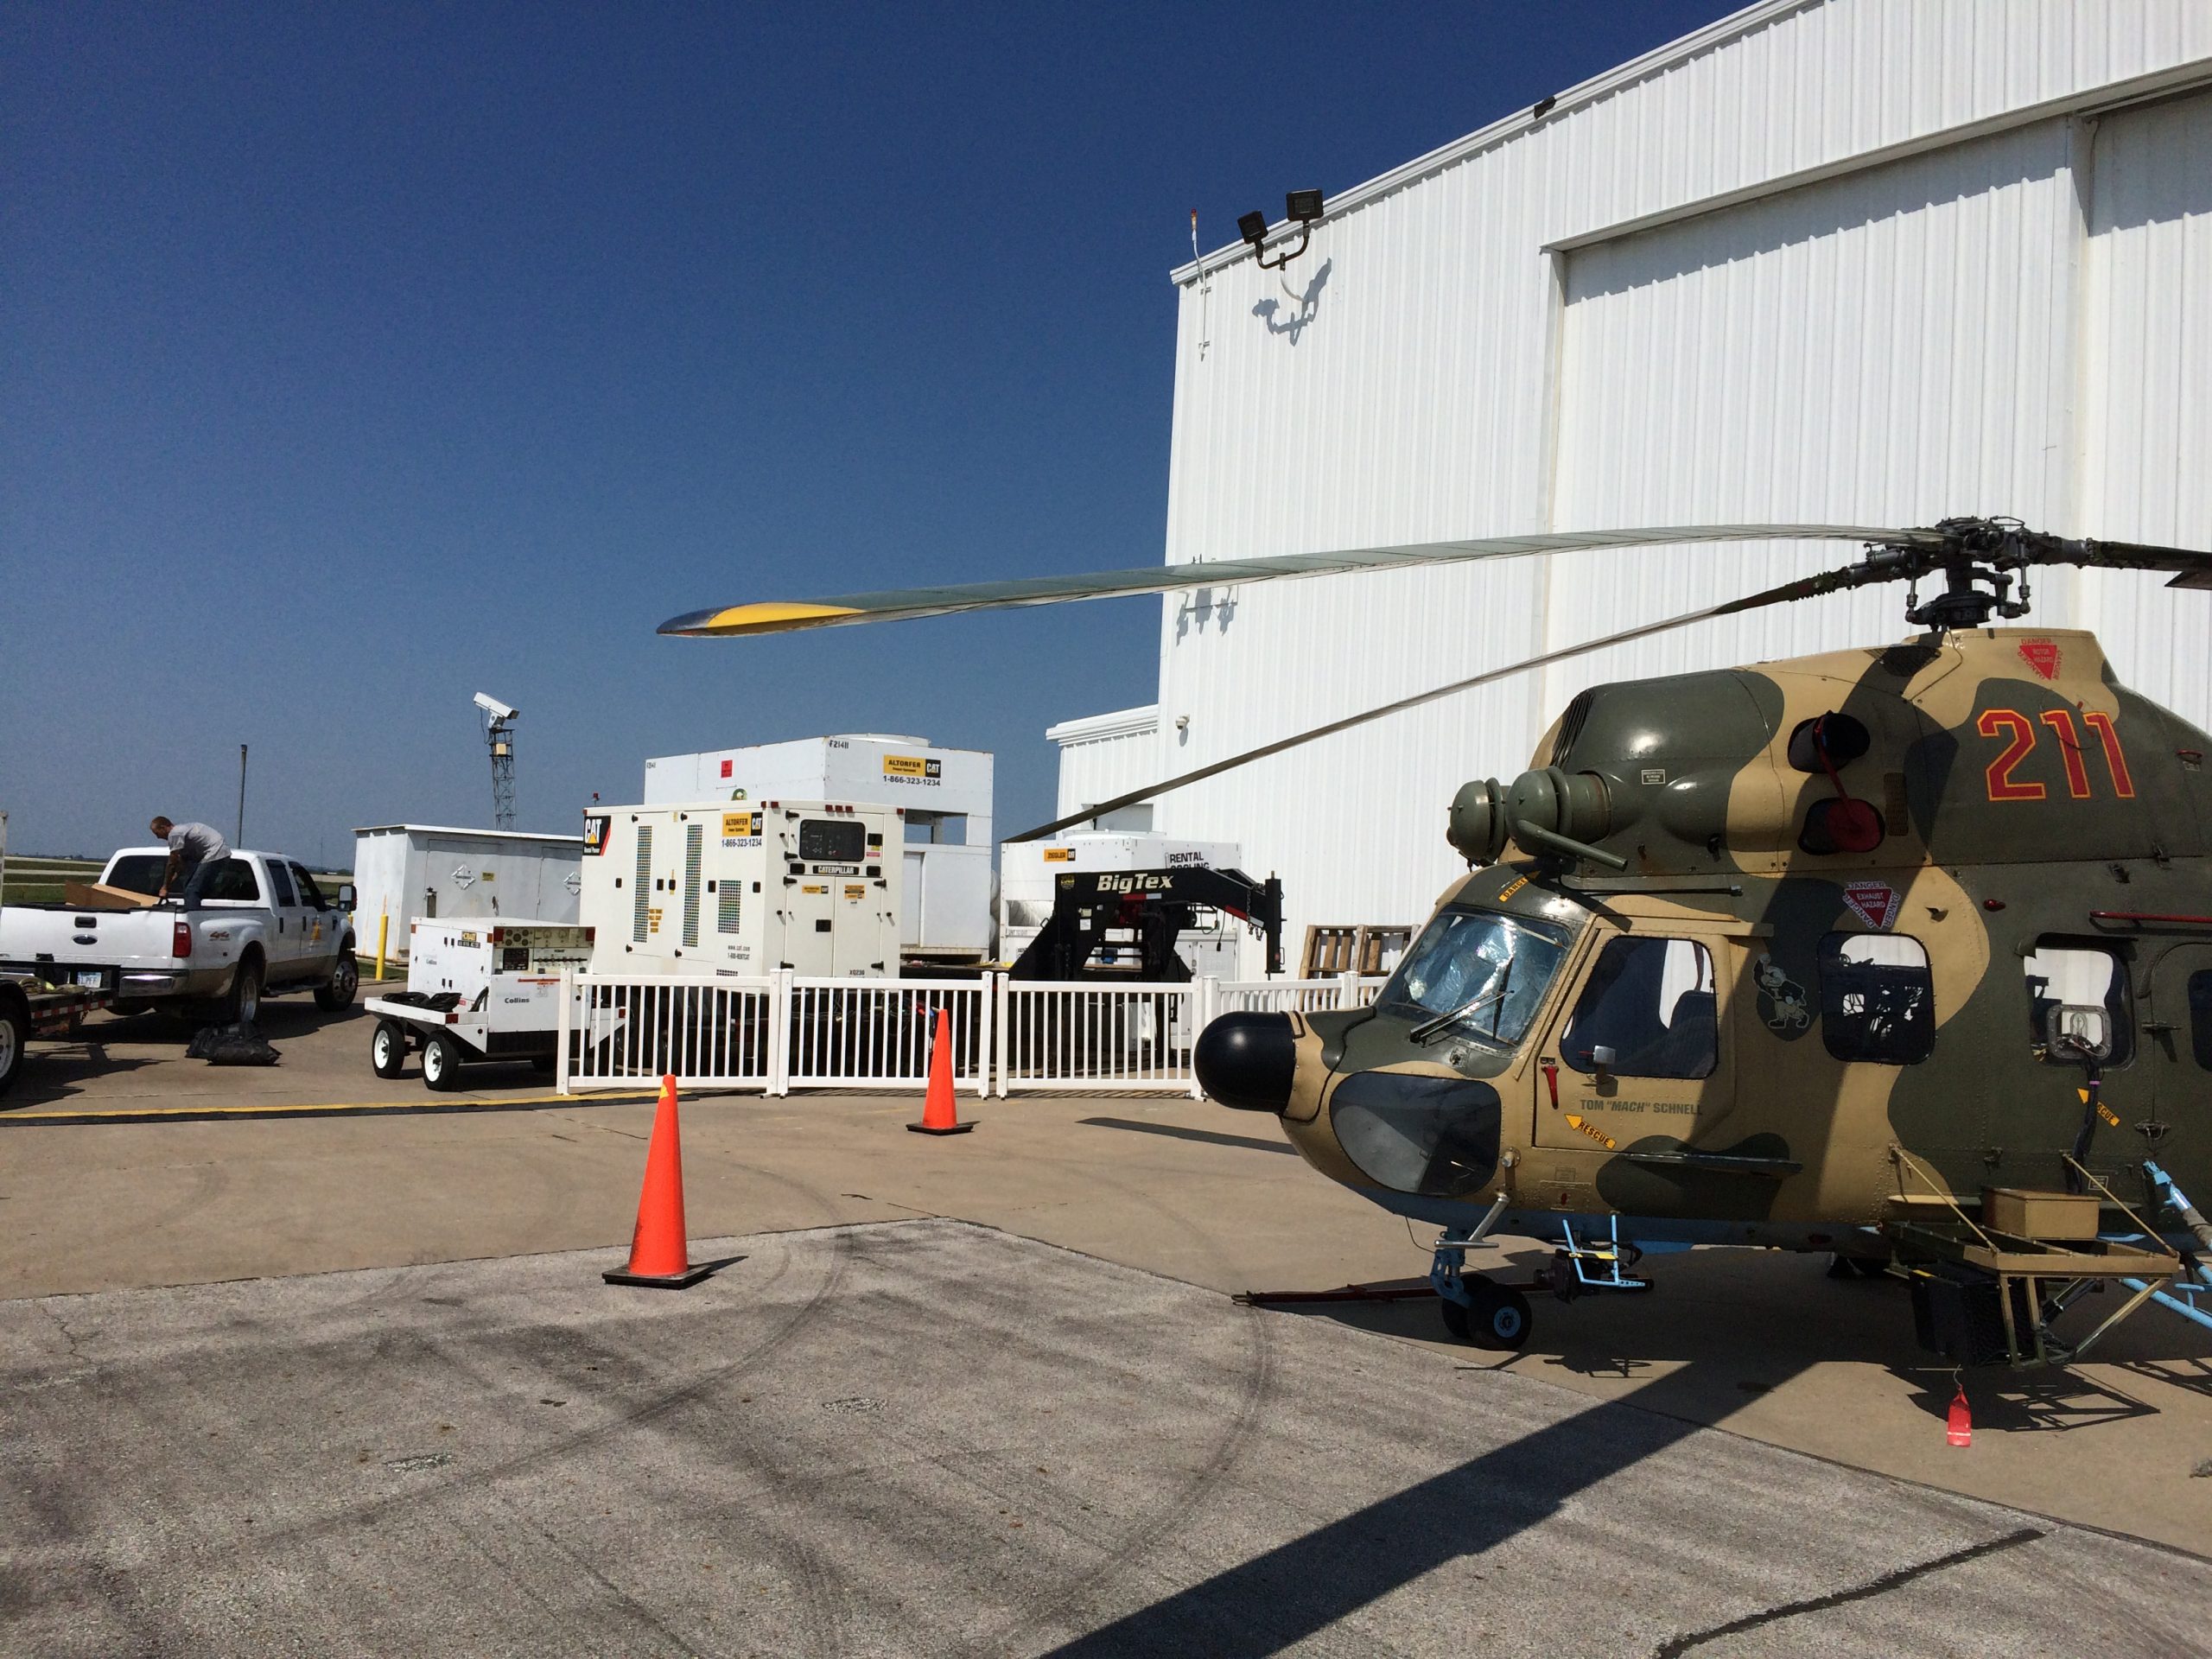 Helicopter, Generator and Air Conditioning units outside of airplane hangar